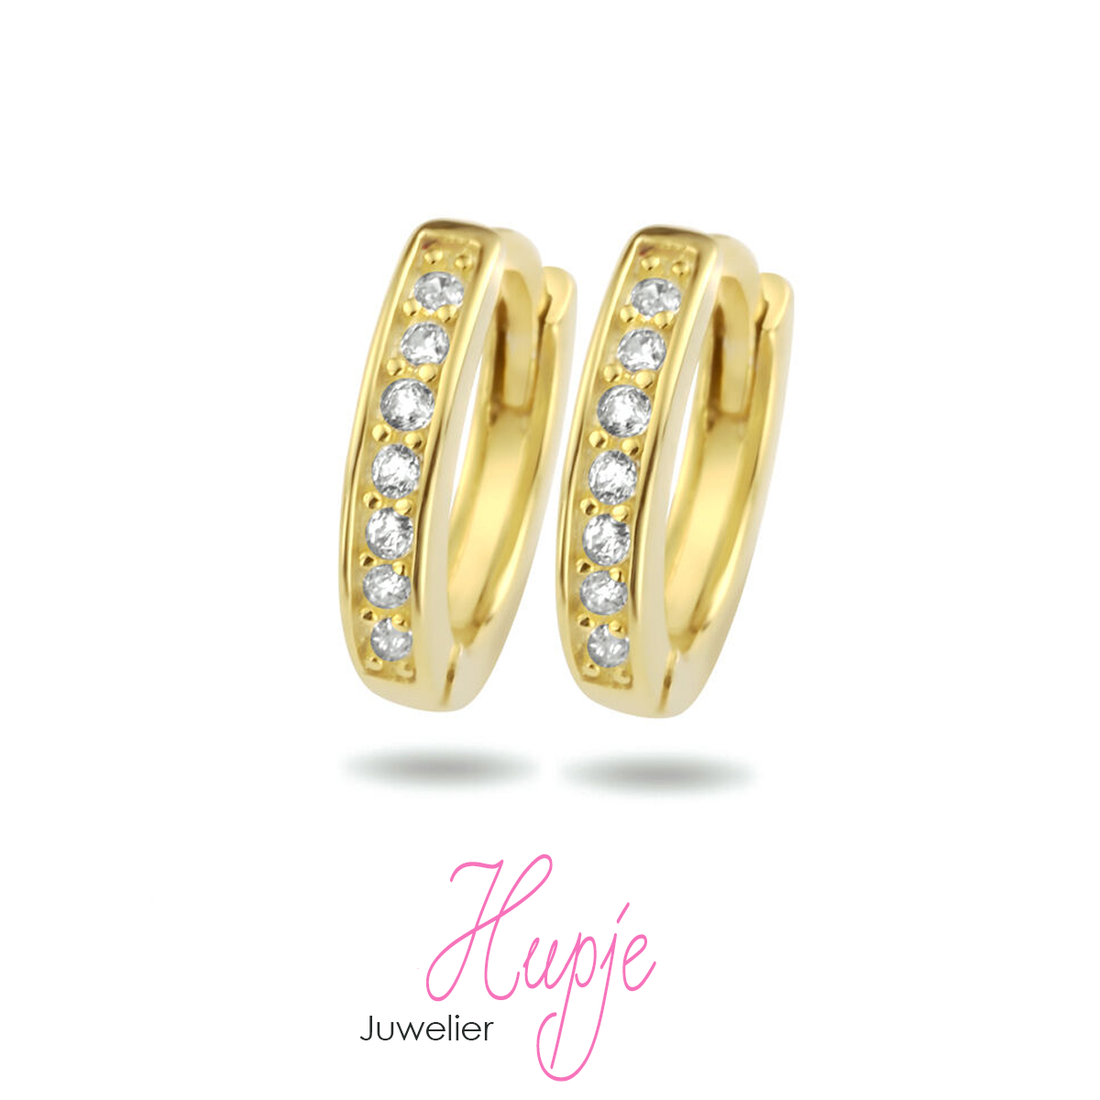 silver earrings with gold plating Classy Zirconia